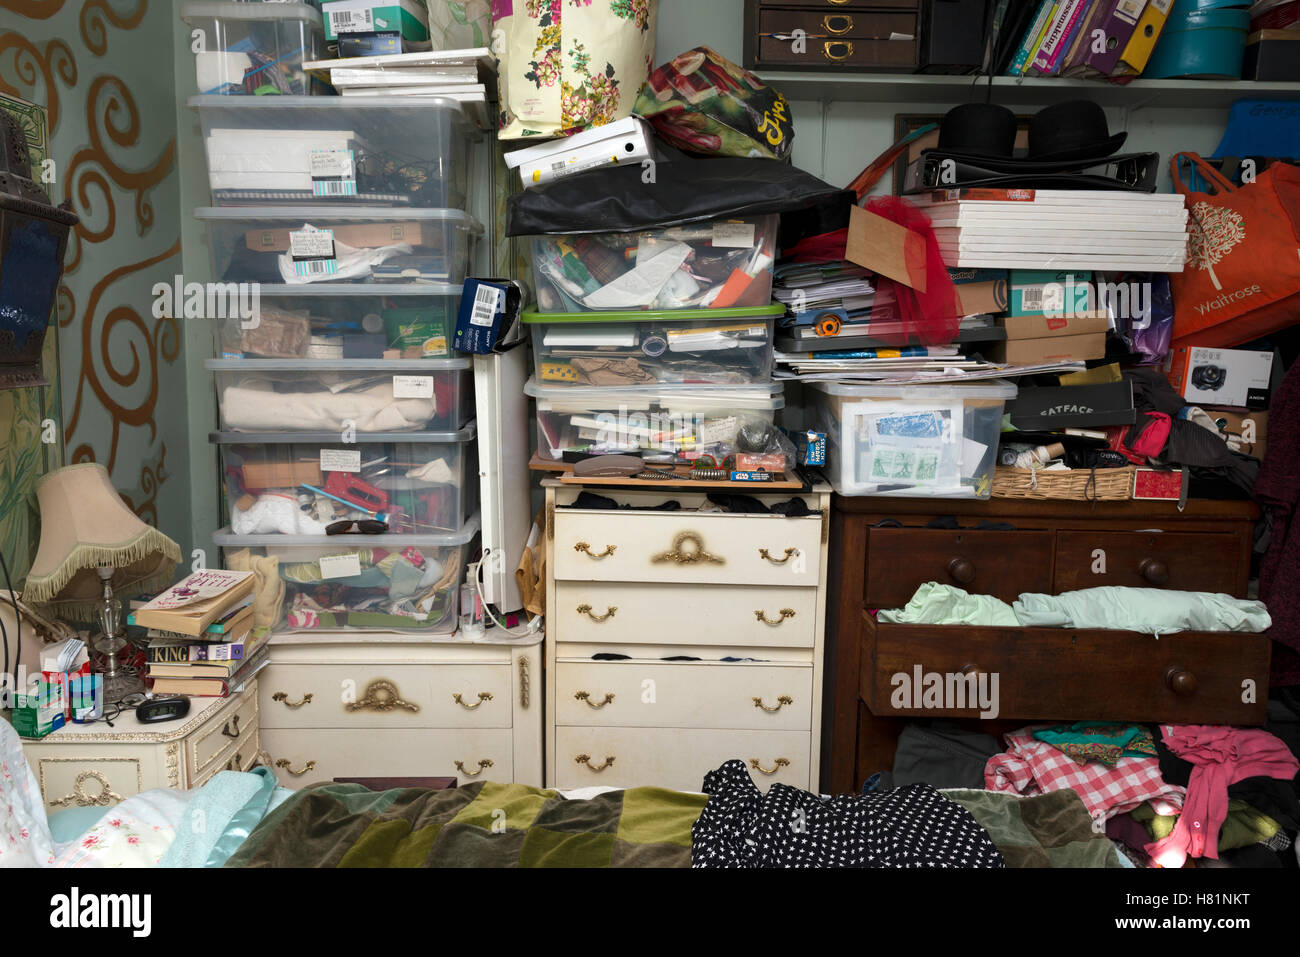 Cluttered bedroom Stock Photo